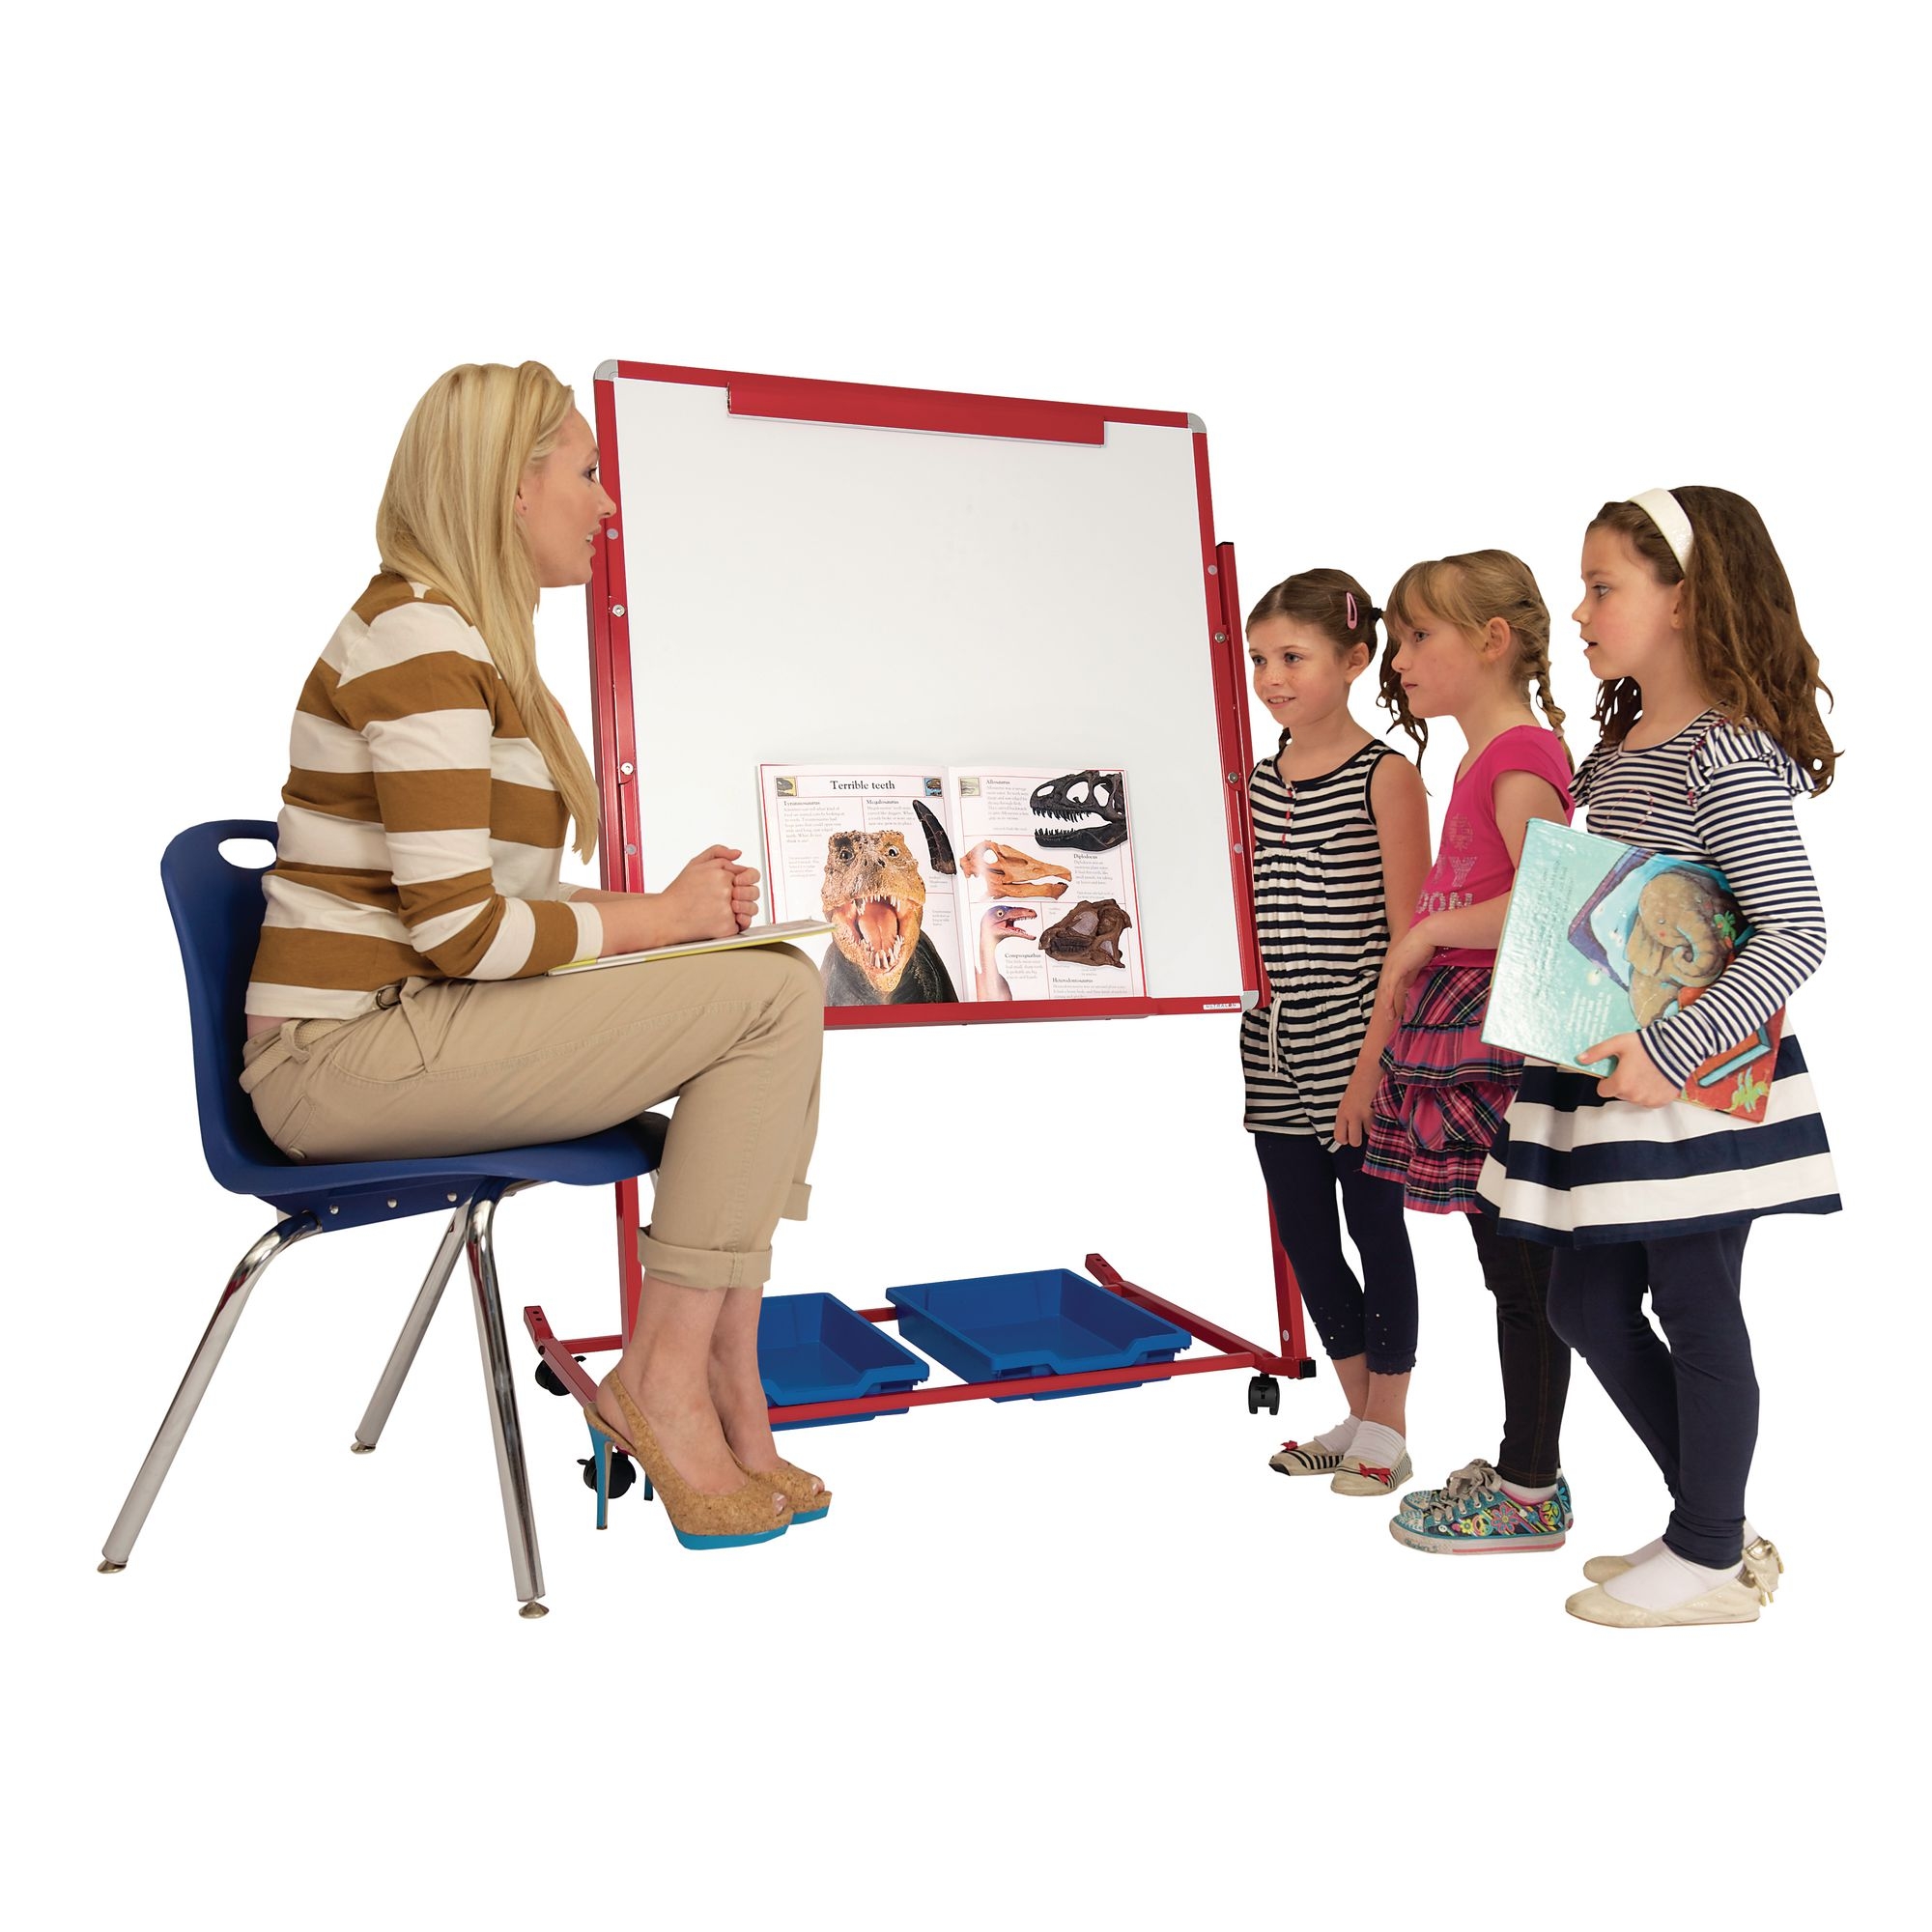 Single Sided Mobile Magnetic Display/ Storage Easel - Red